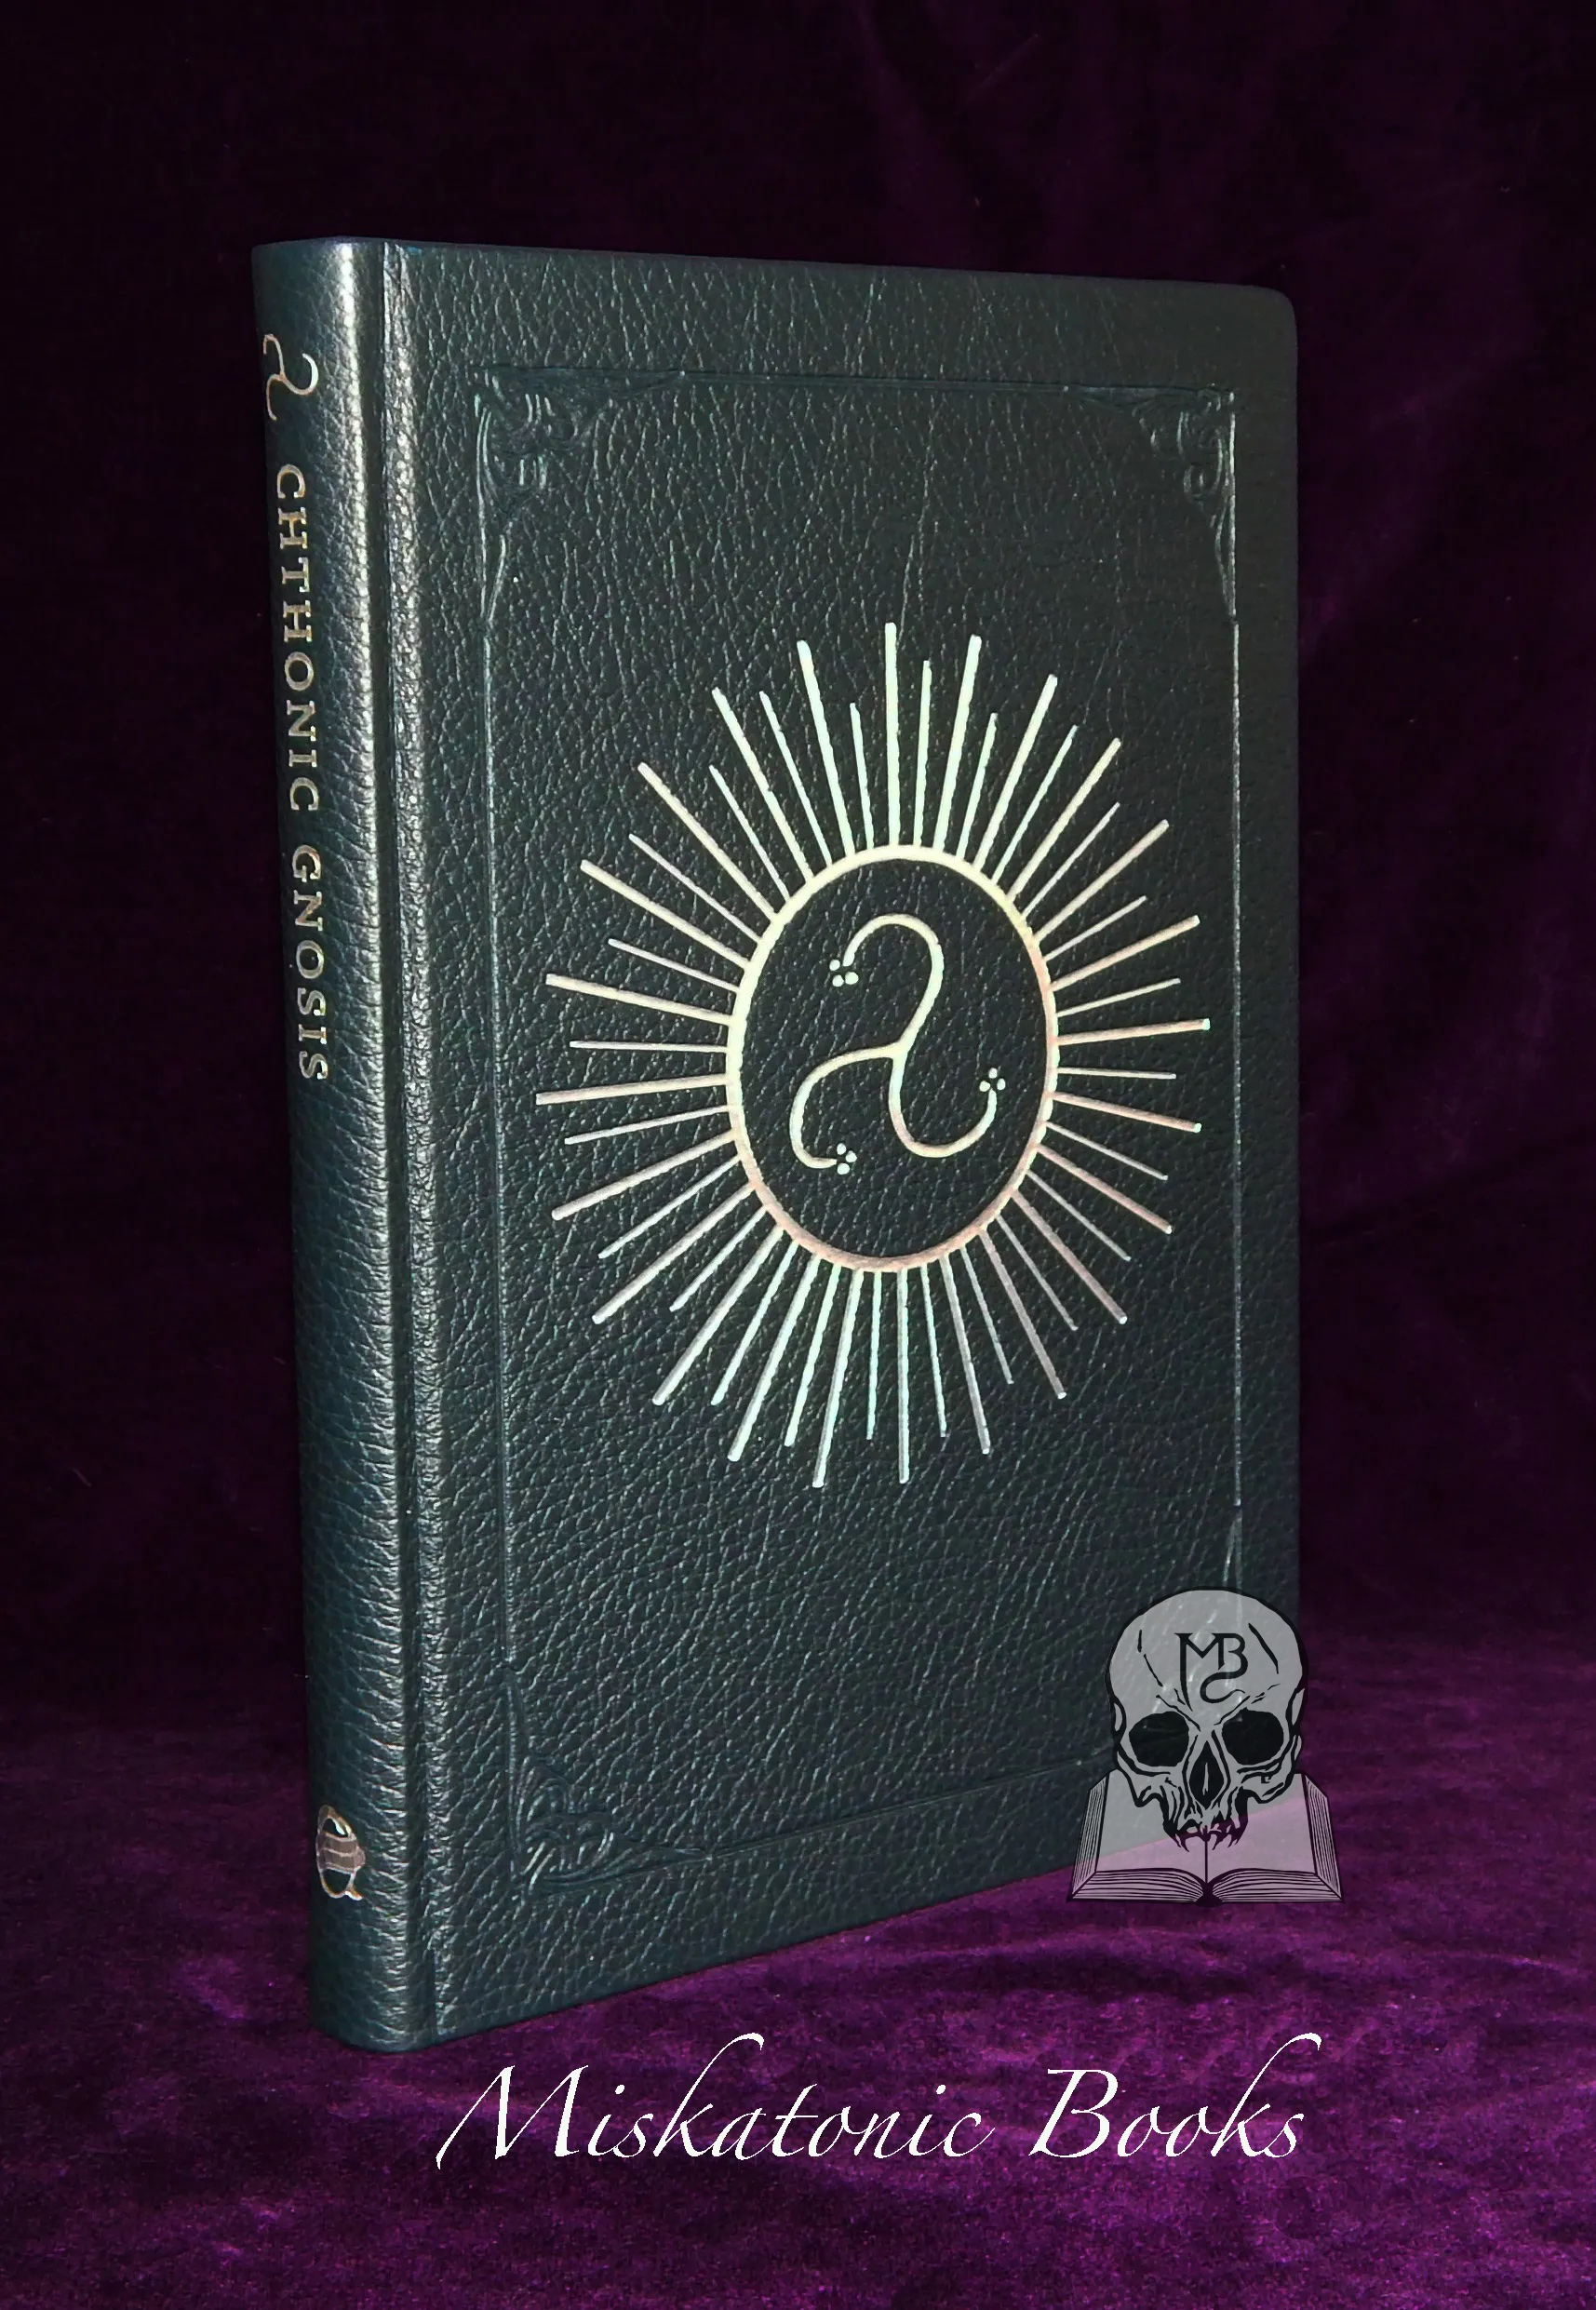 CHTHONIC GNOSIS: Ludwig Klages and his Quest for the Pandaemonic All by Dr. Gunnar Alksnis - Deluxe Special Edition Leather Bound Hardcover with Silver Talismanic Pendant